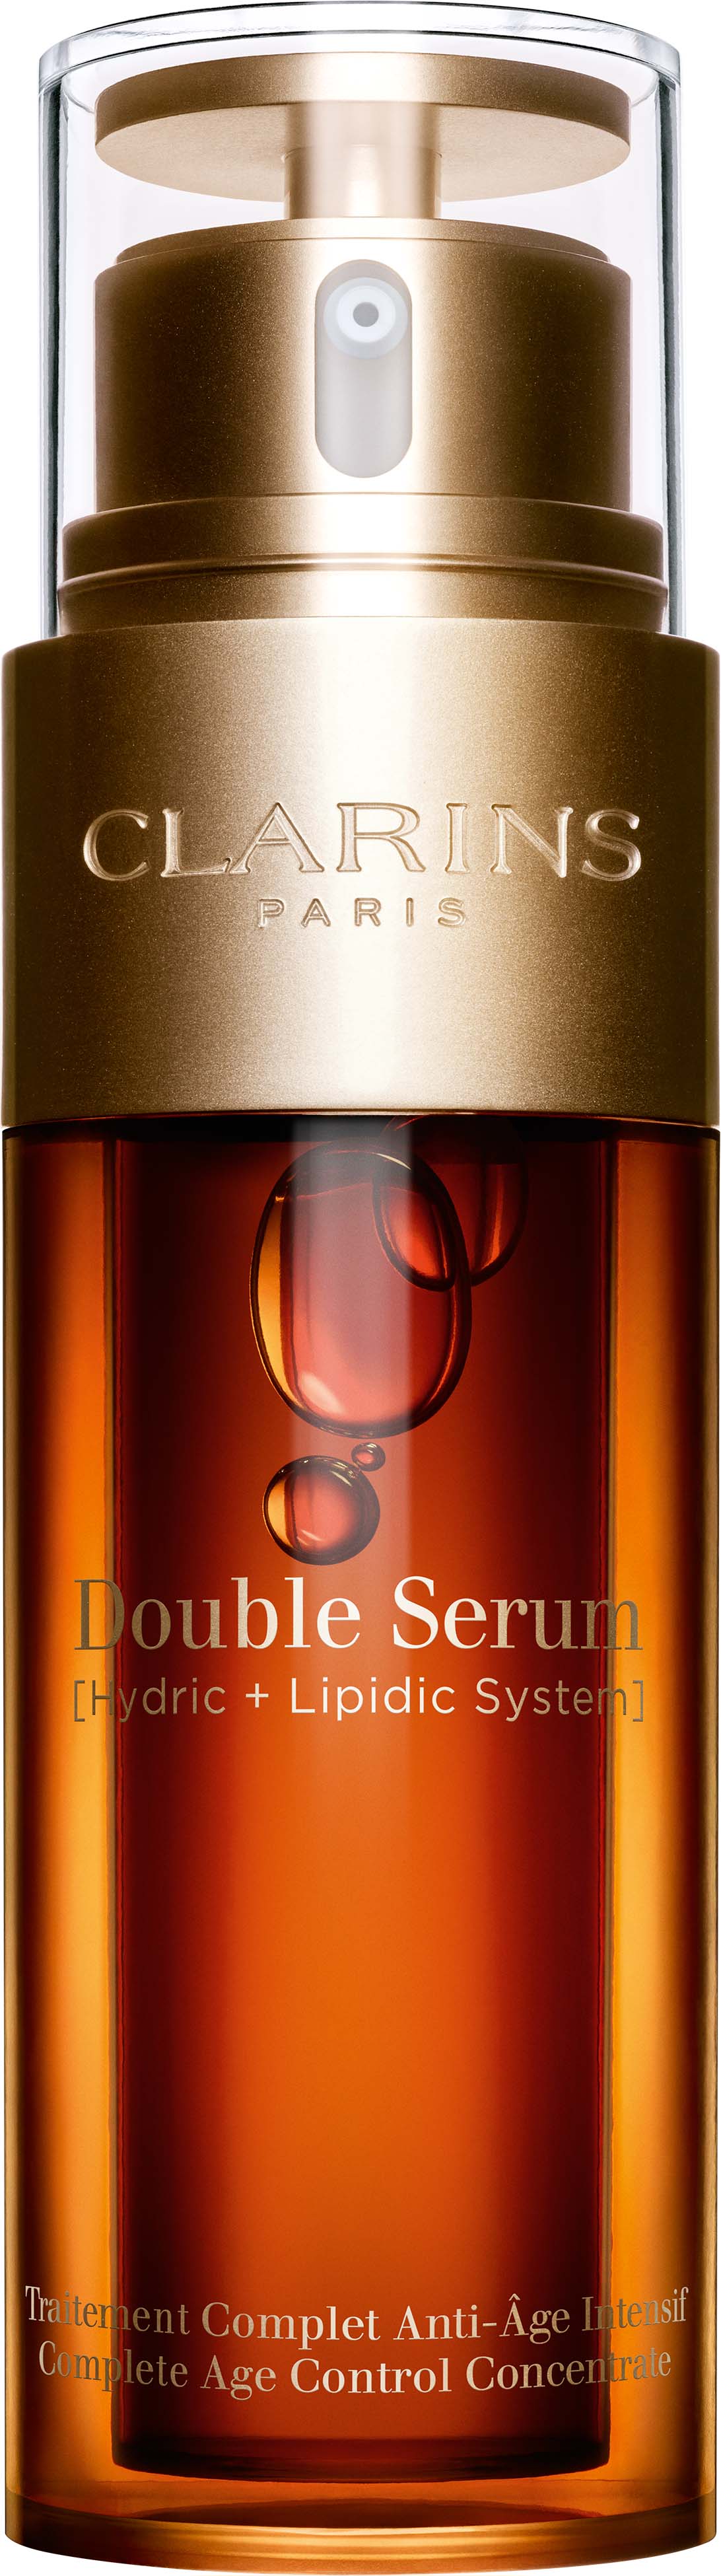 clarins double serum traitement complet anti age intensif 50 ml